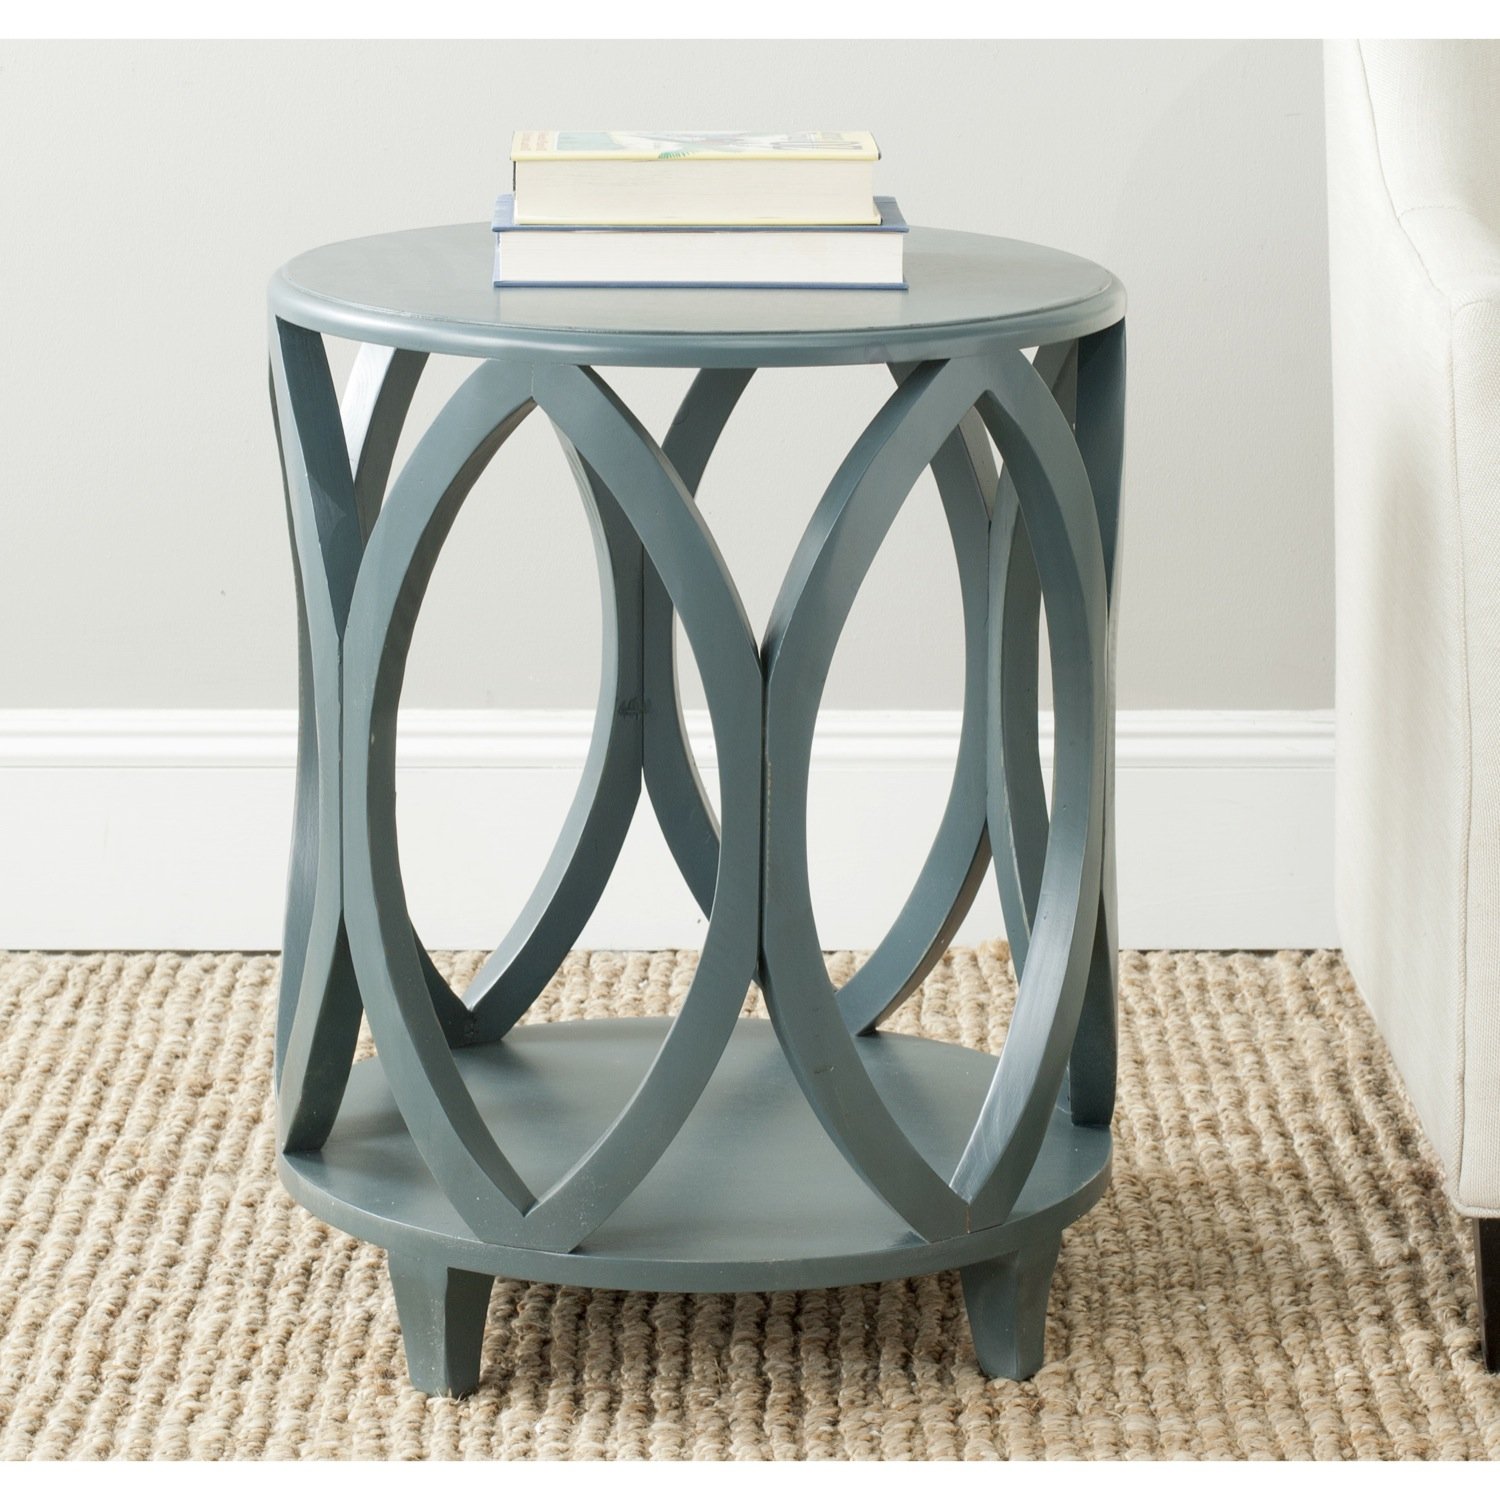 safavieh american homes collection janika steel teal accent table kitchen dining target planters modern marble top coffee corner pottery barn chair slipcovers wooden threshold